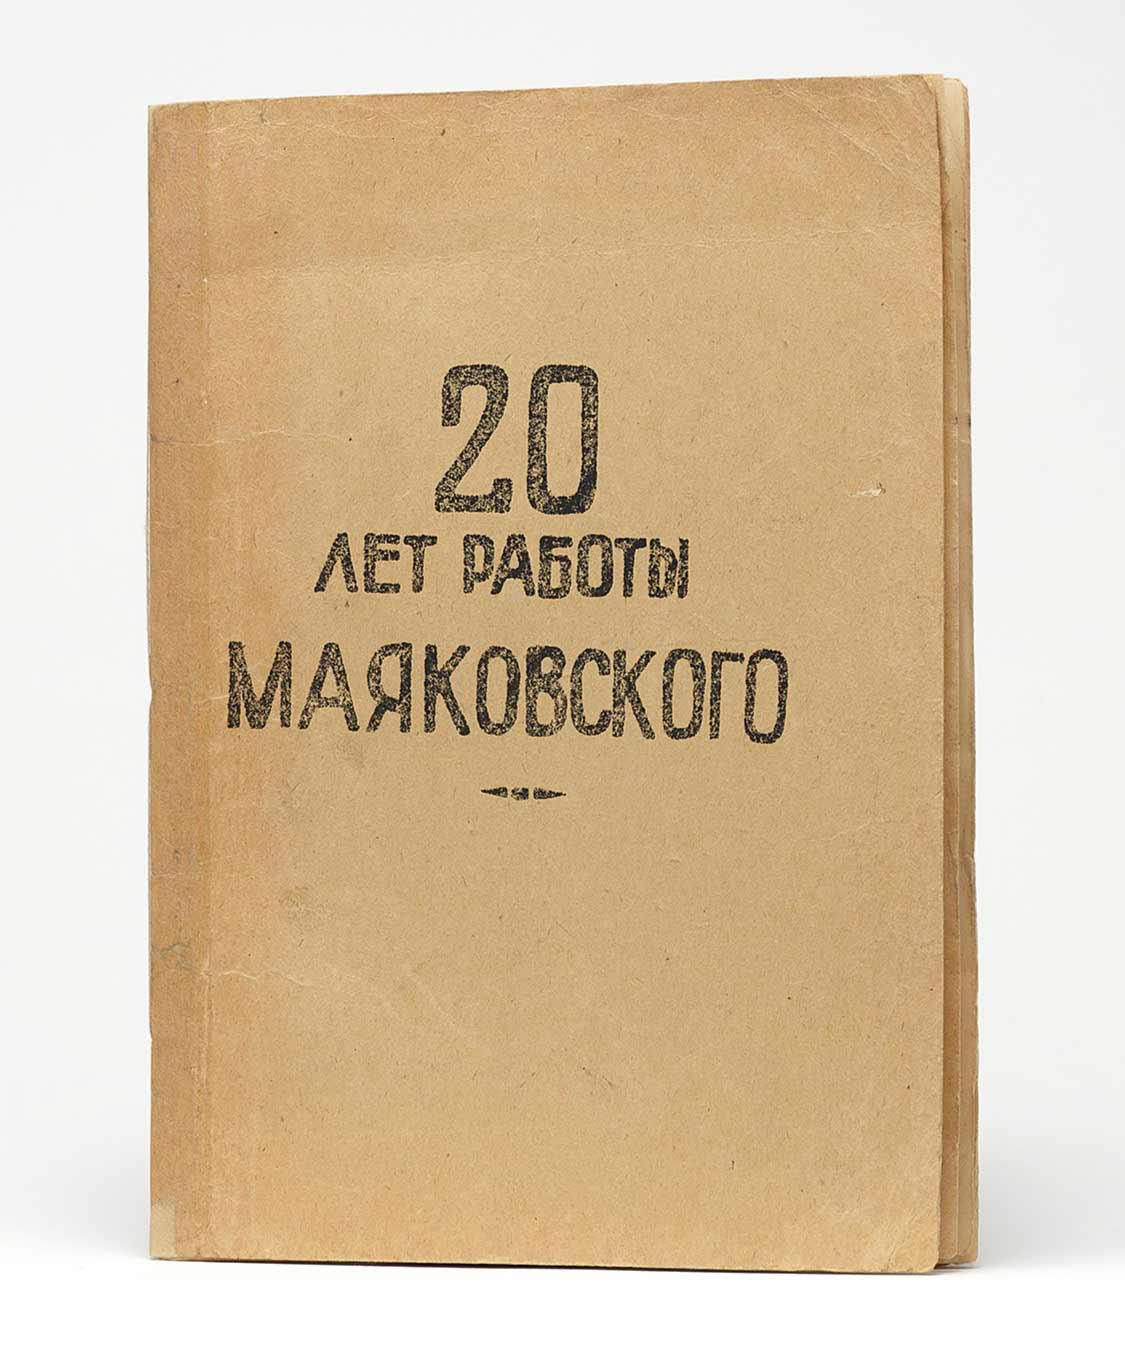 Brown paper catalog with black Cyrillic lettering on the cover